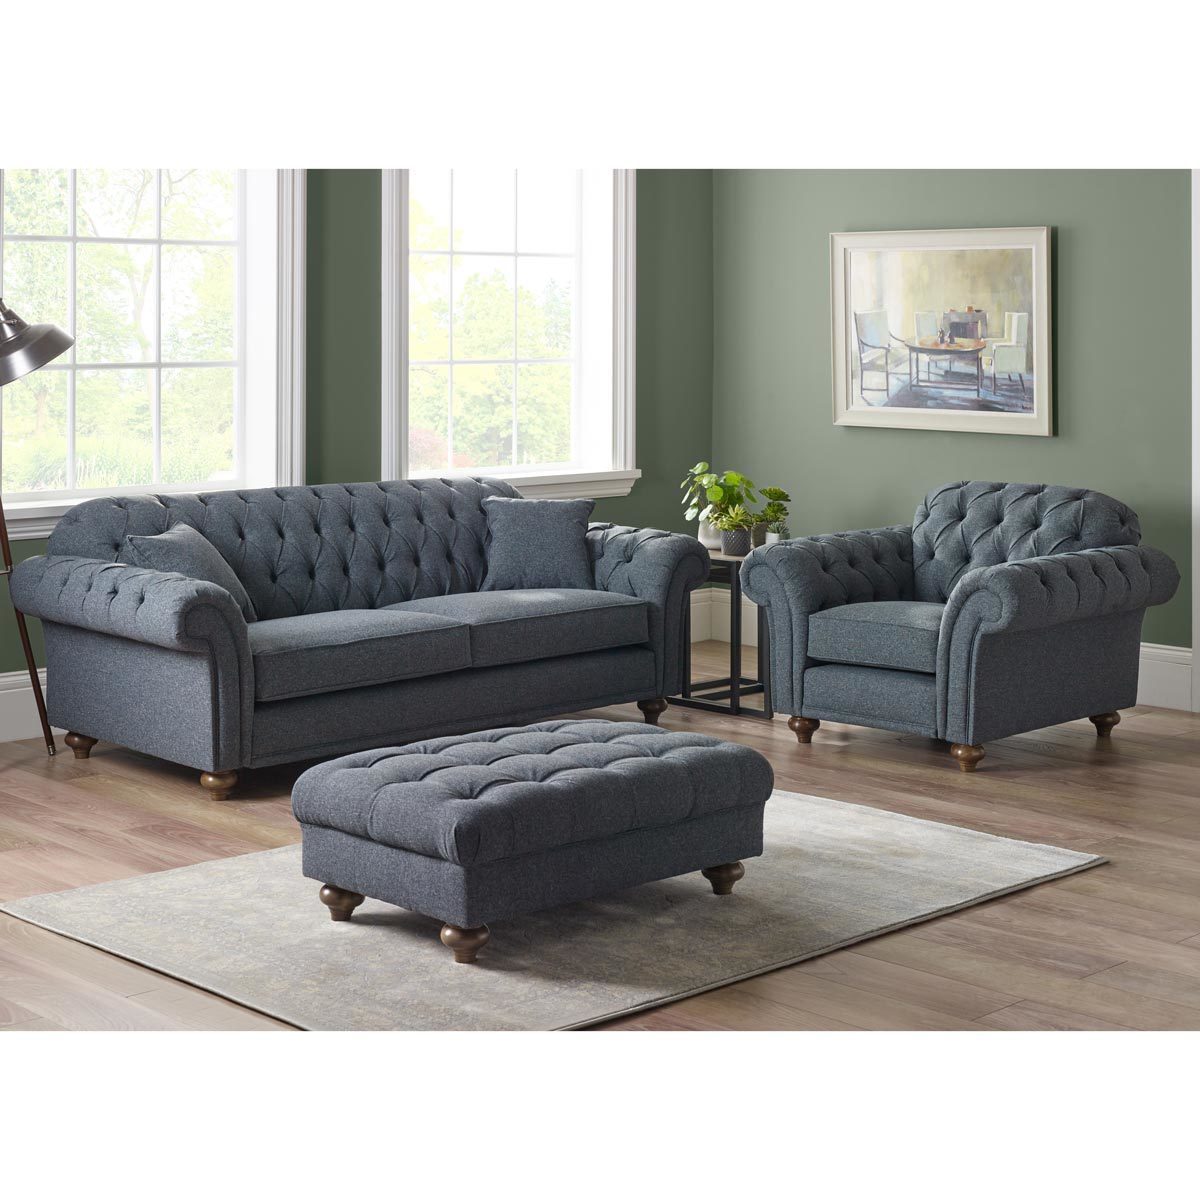 Bordeaux Button Back 3 Seater Fabric Sofa, Grey - Signature Retail Stores